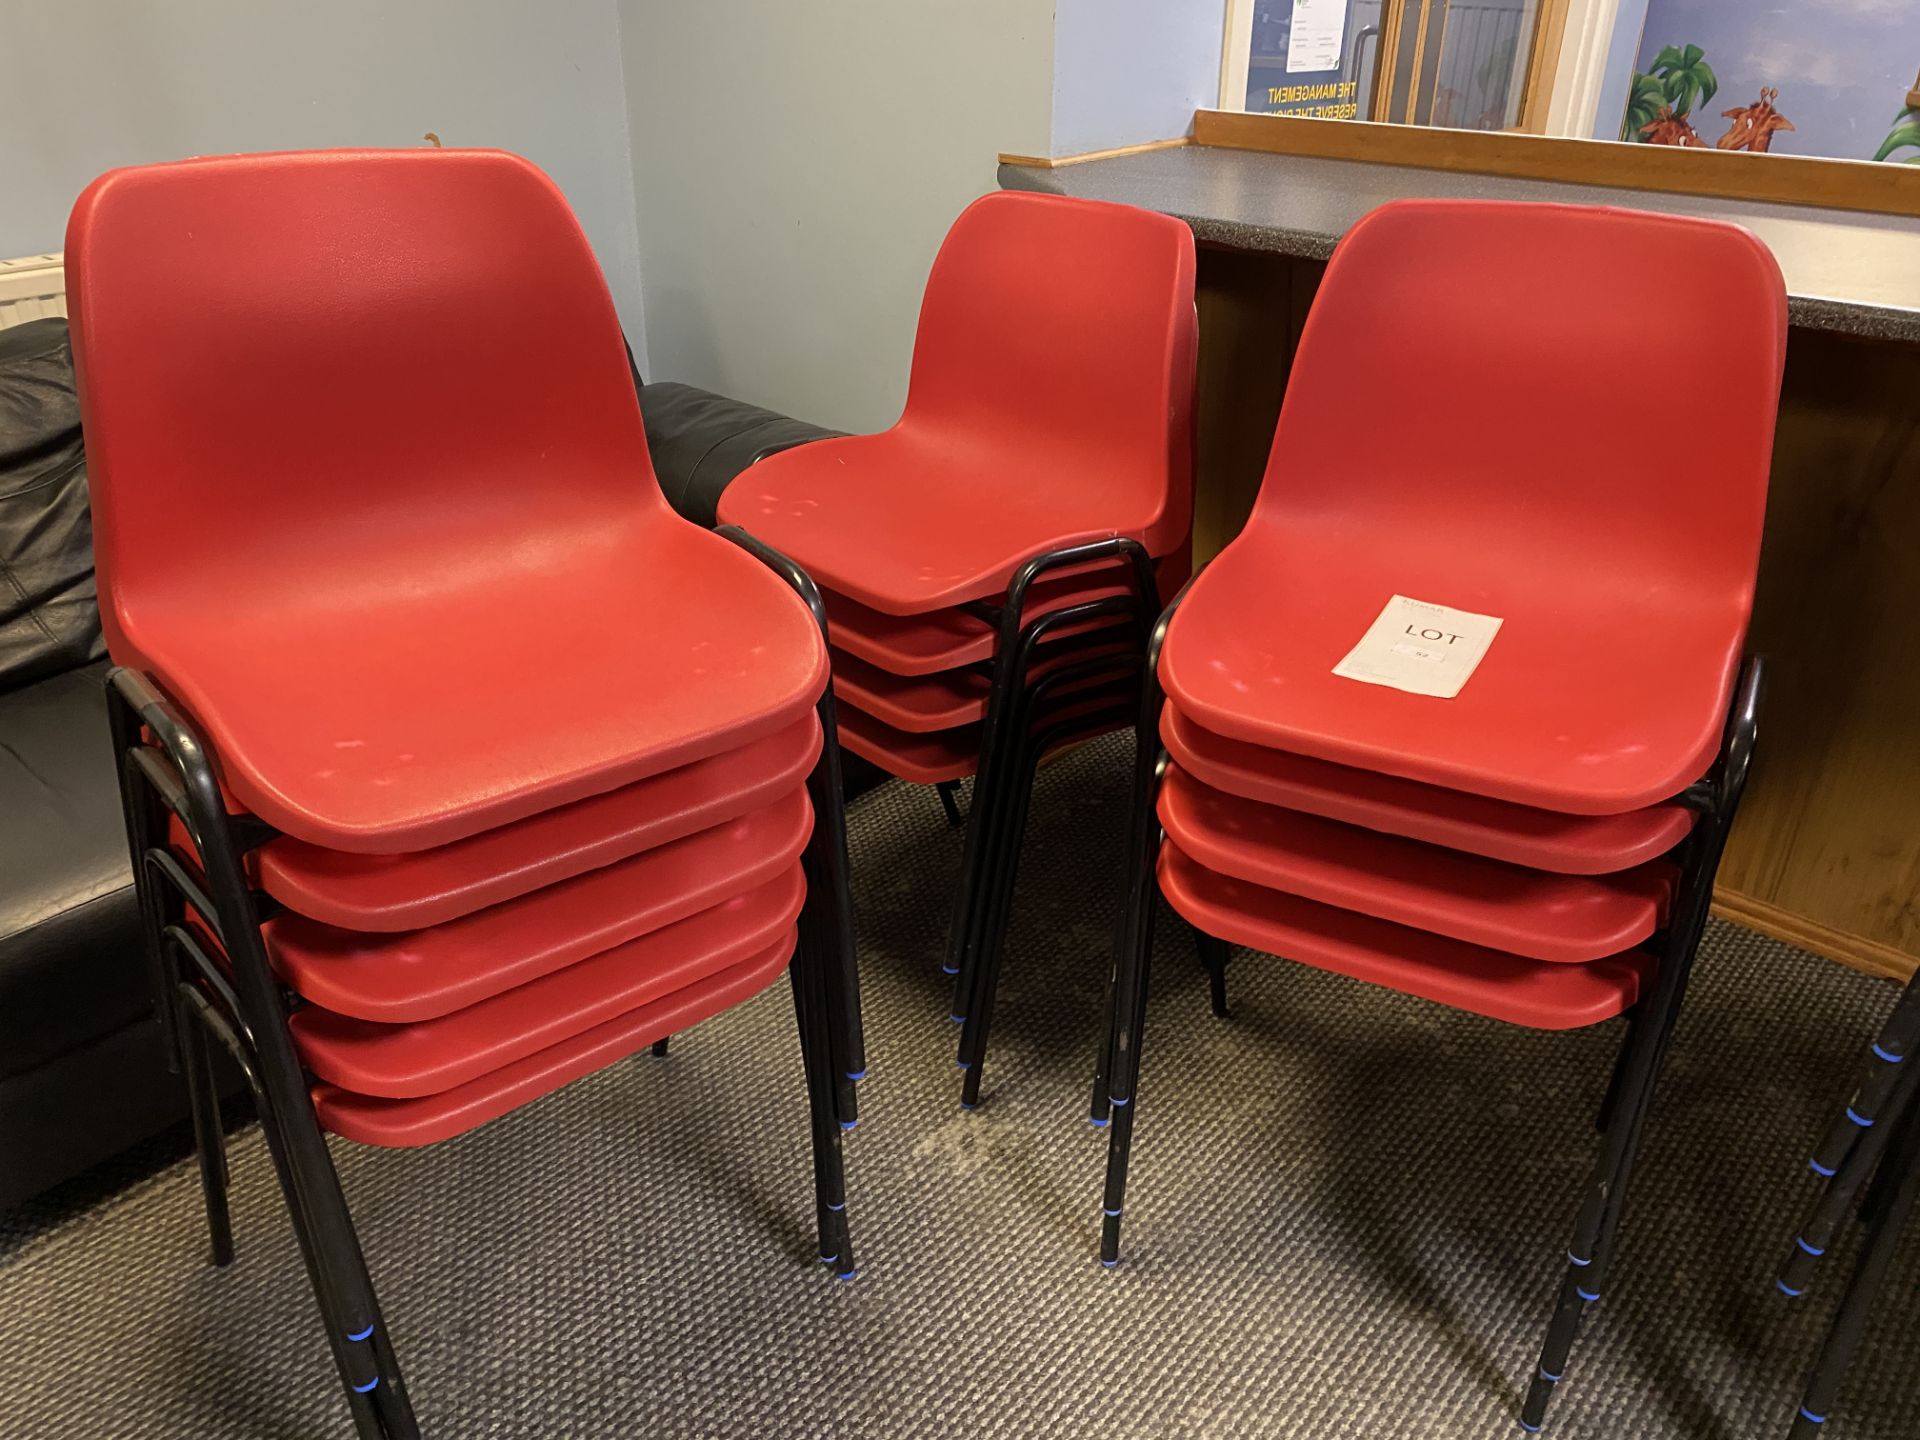 13x Red Plastic Chairs